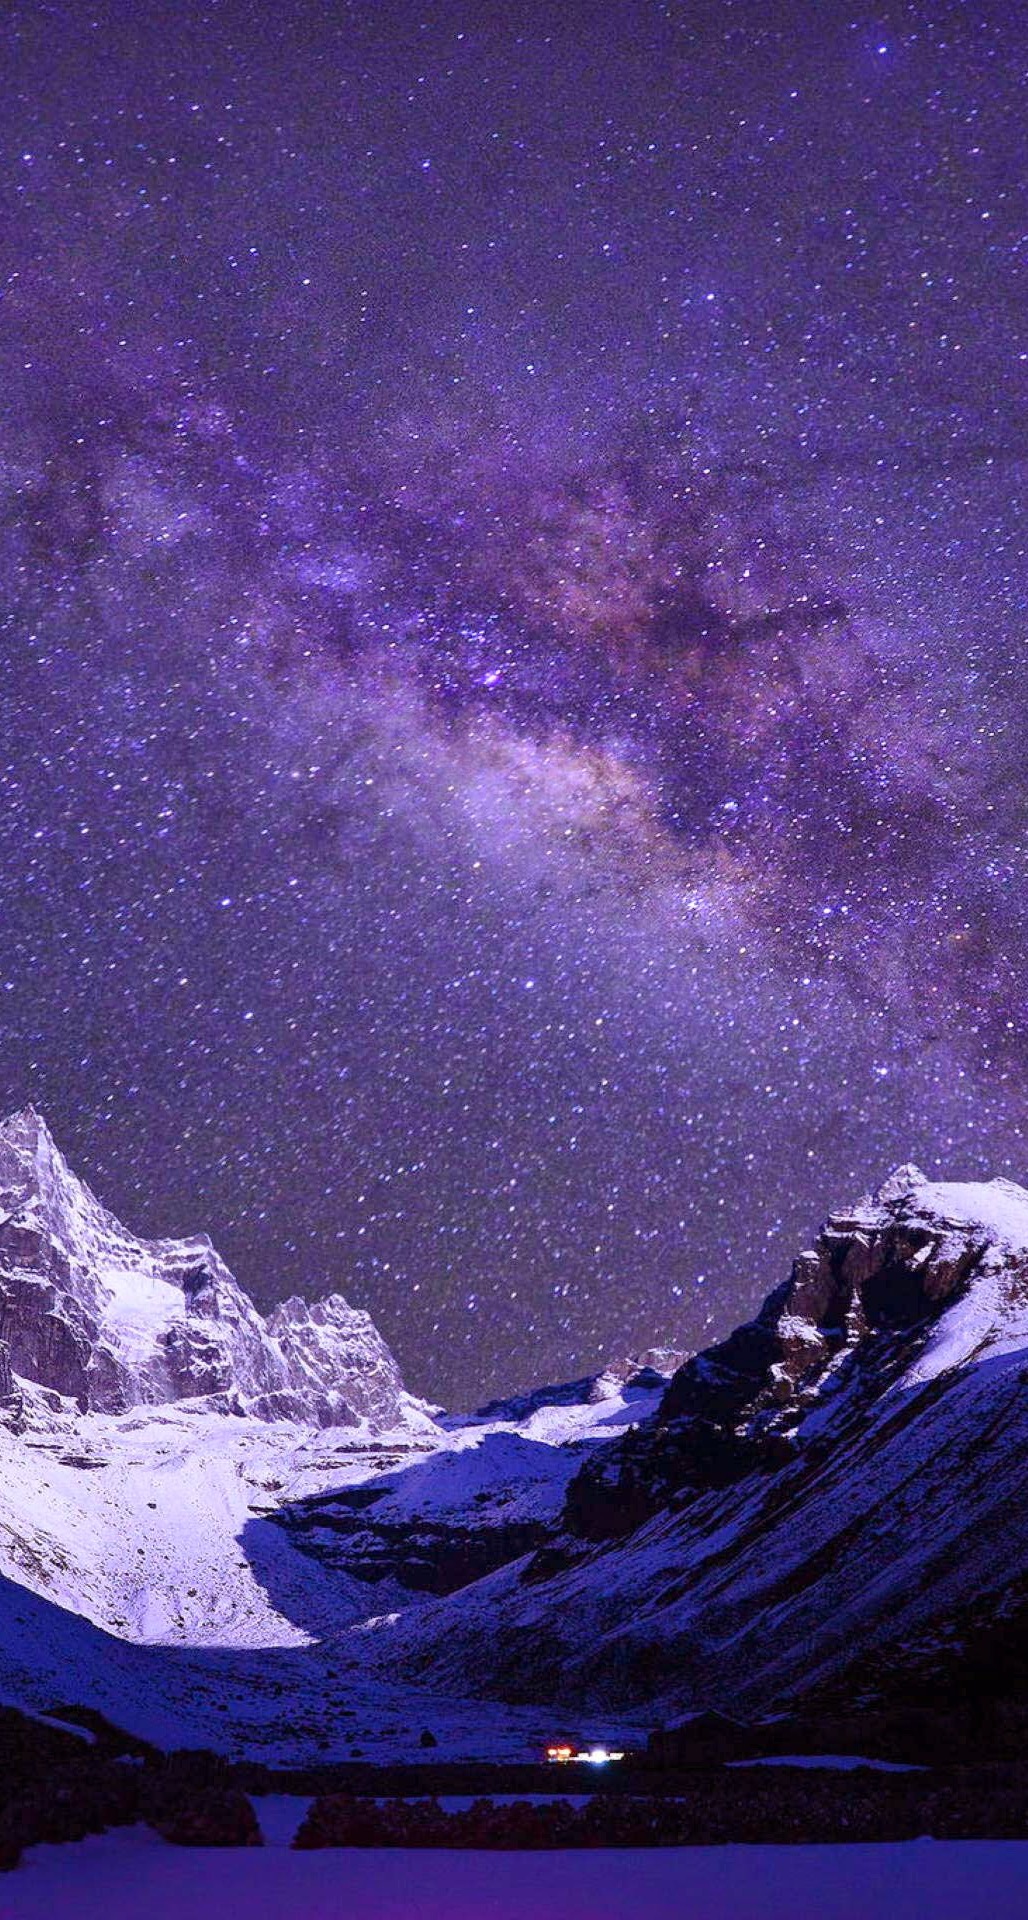 Milky Way Over Snow Mountains iPhone 6 Plus HD Wallpaper